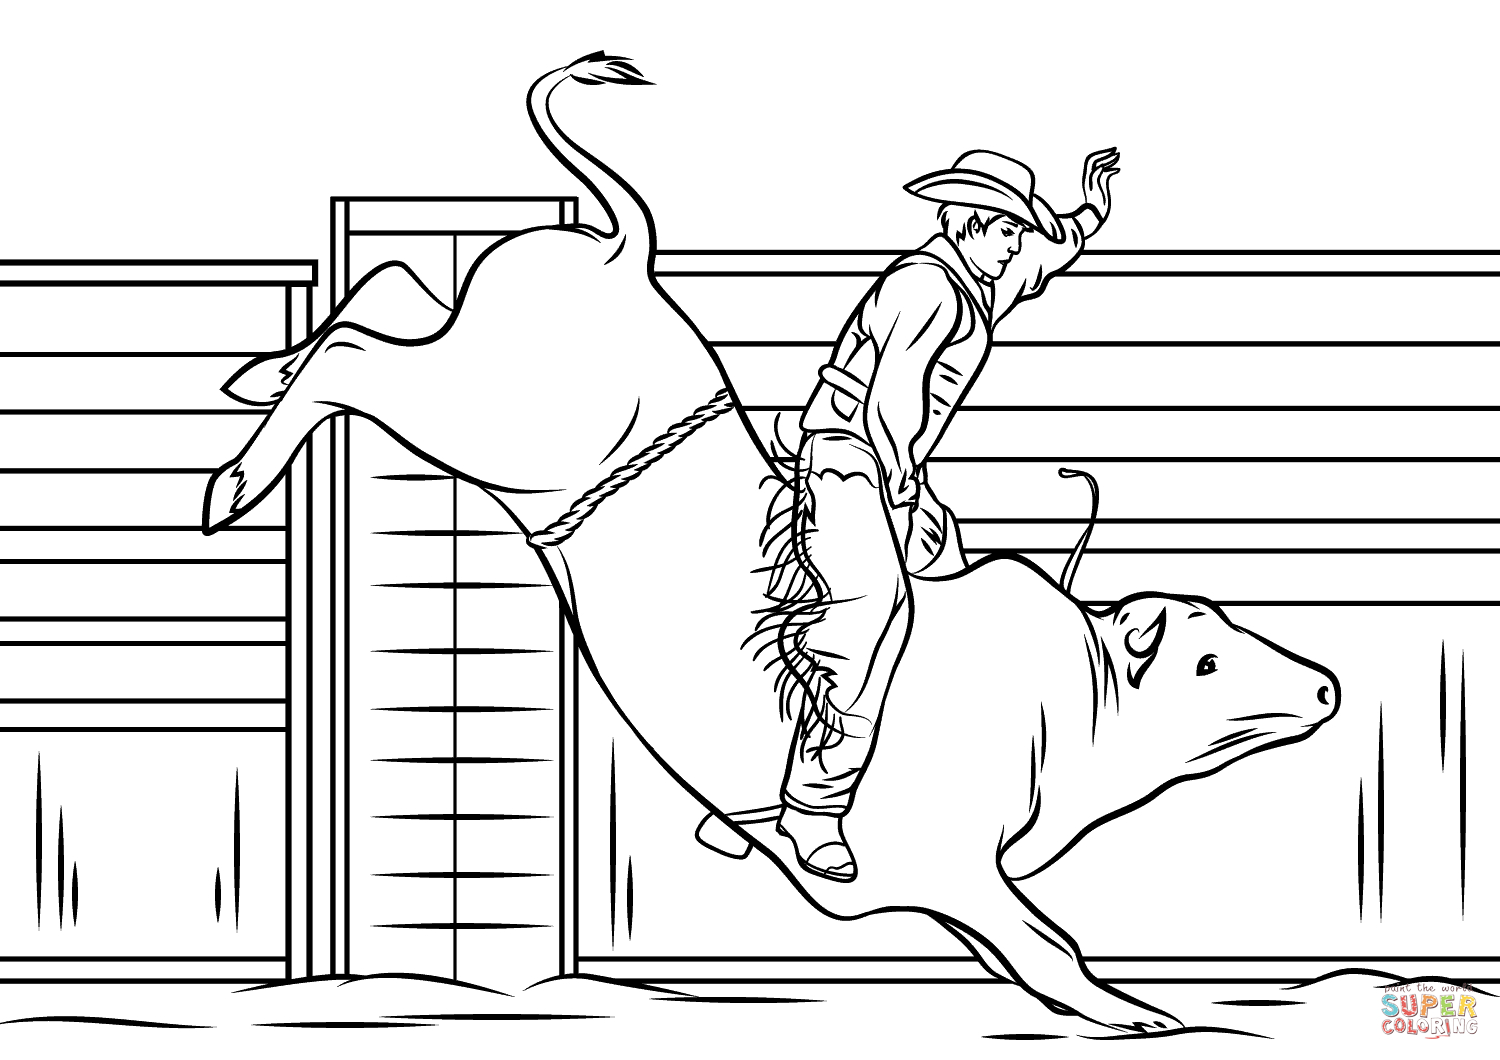 Bull Riding Coloring Pages Cowboy Riding A Bull Coloring Page Free Printable Coloring Pages